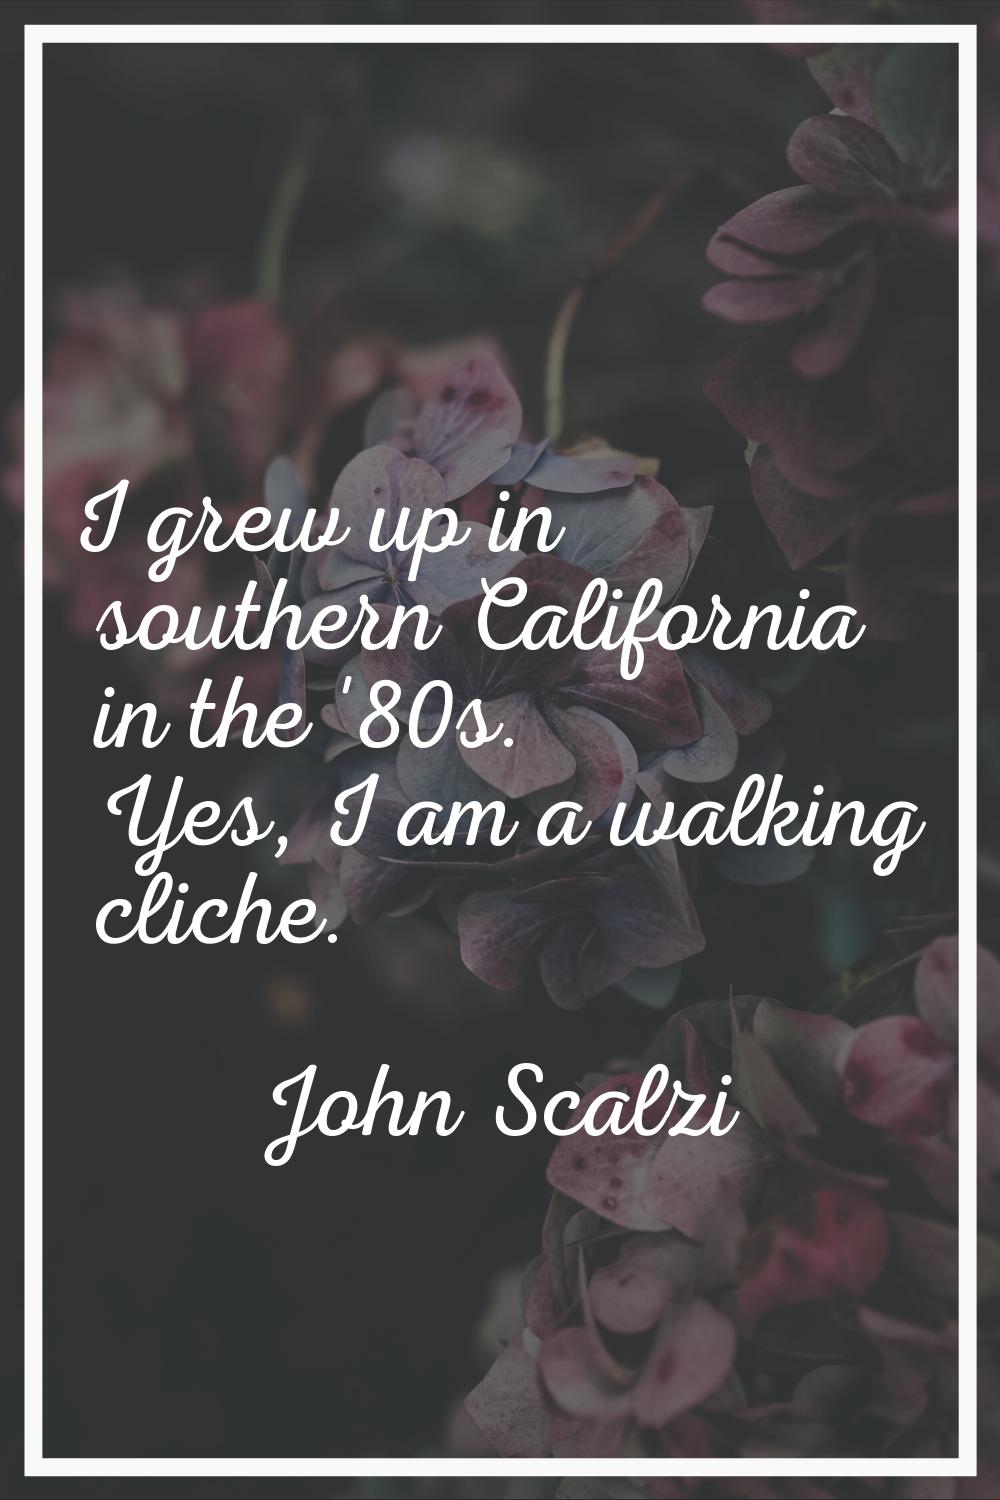 I grew up in southern California in the '80s. Yes, I am a walking cliche.